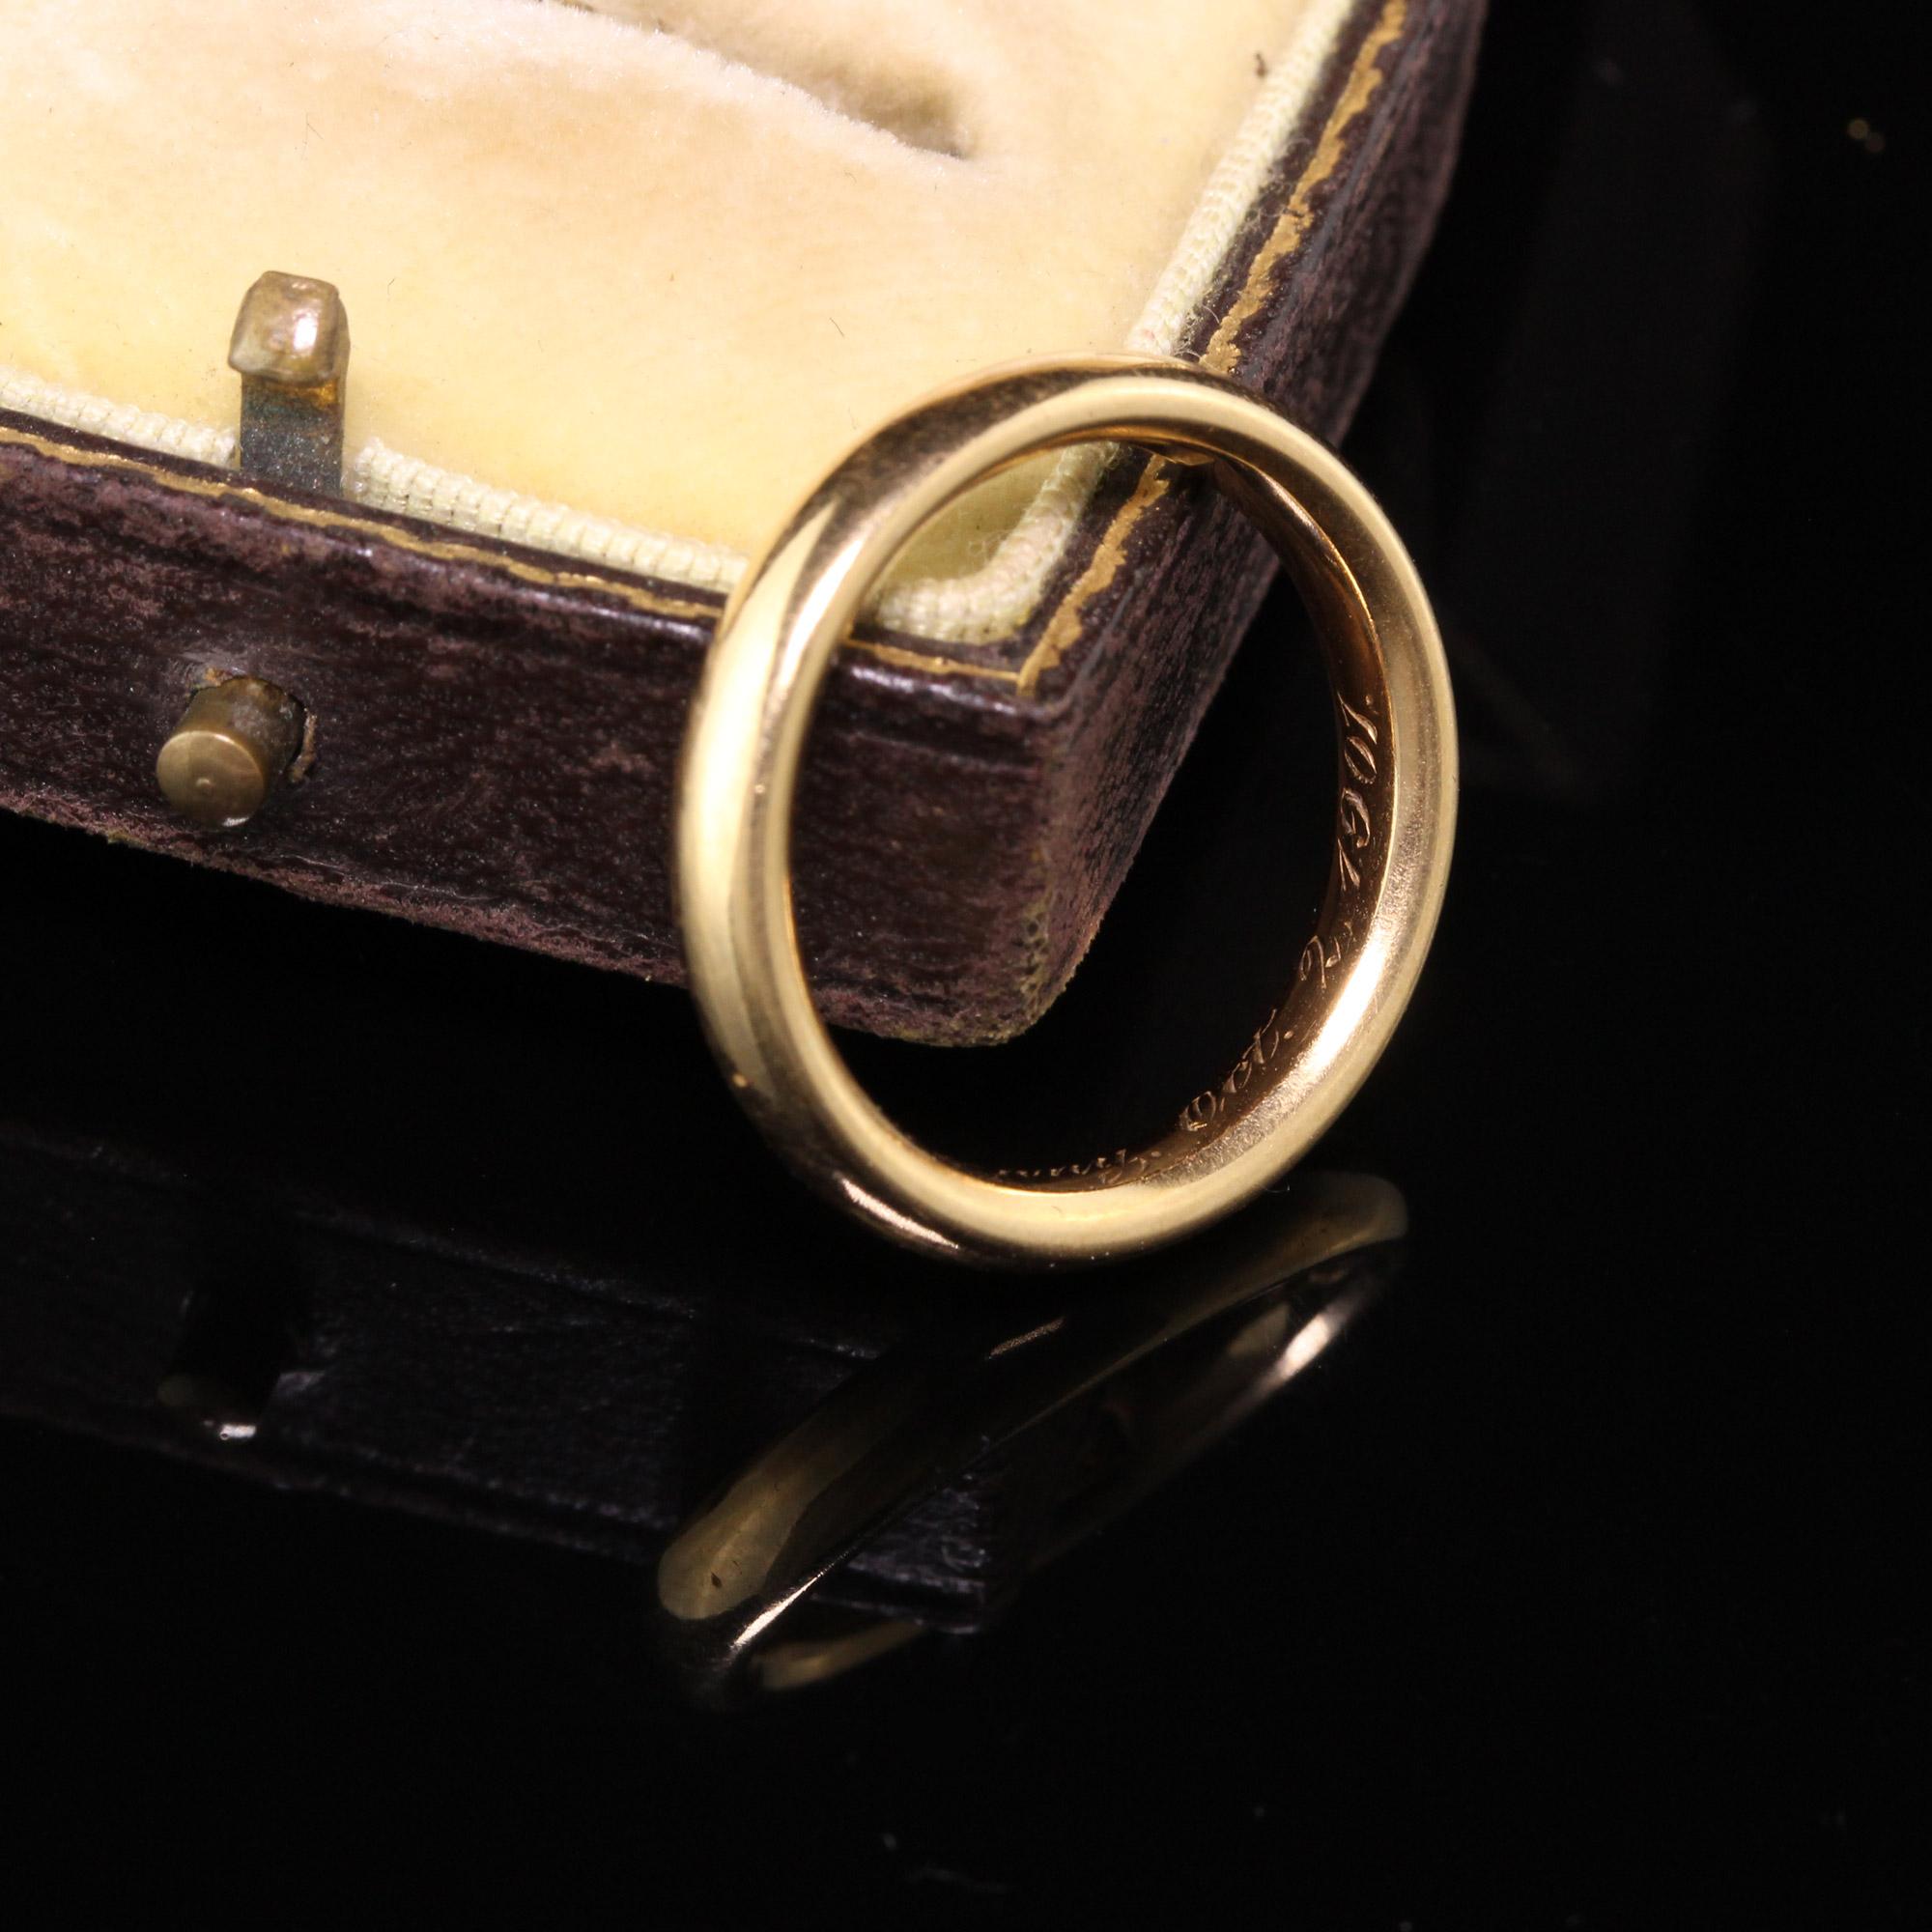 A gorgeous Shreve Crump and Low Antique Victorian 18K Yellow Gold Engraved 1901 Wedding Band. The band is engraved what appears to be Aolim from Denny Oct 2, 1901. 

Item #R0585

Metal: 18K Yellow Gold

Weight: 5.8 Grams

Ring Size: 6 1/2

*Please